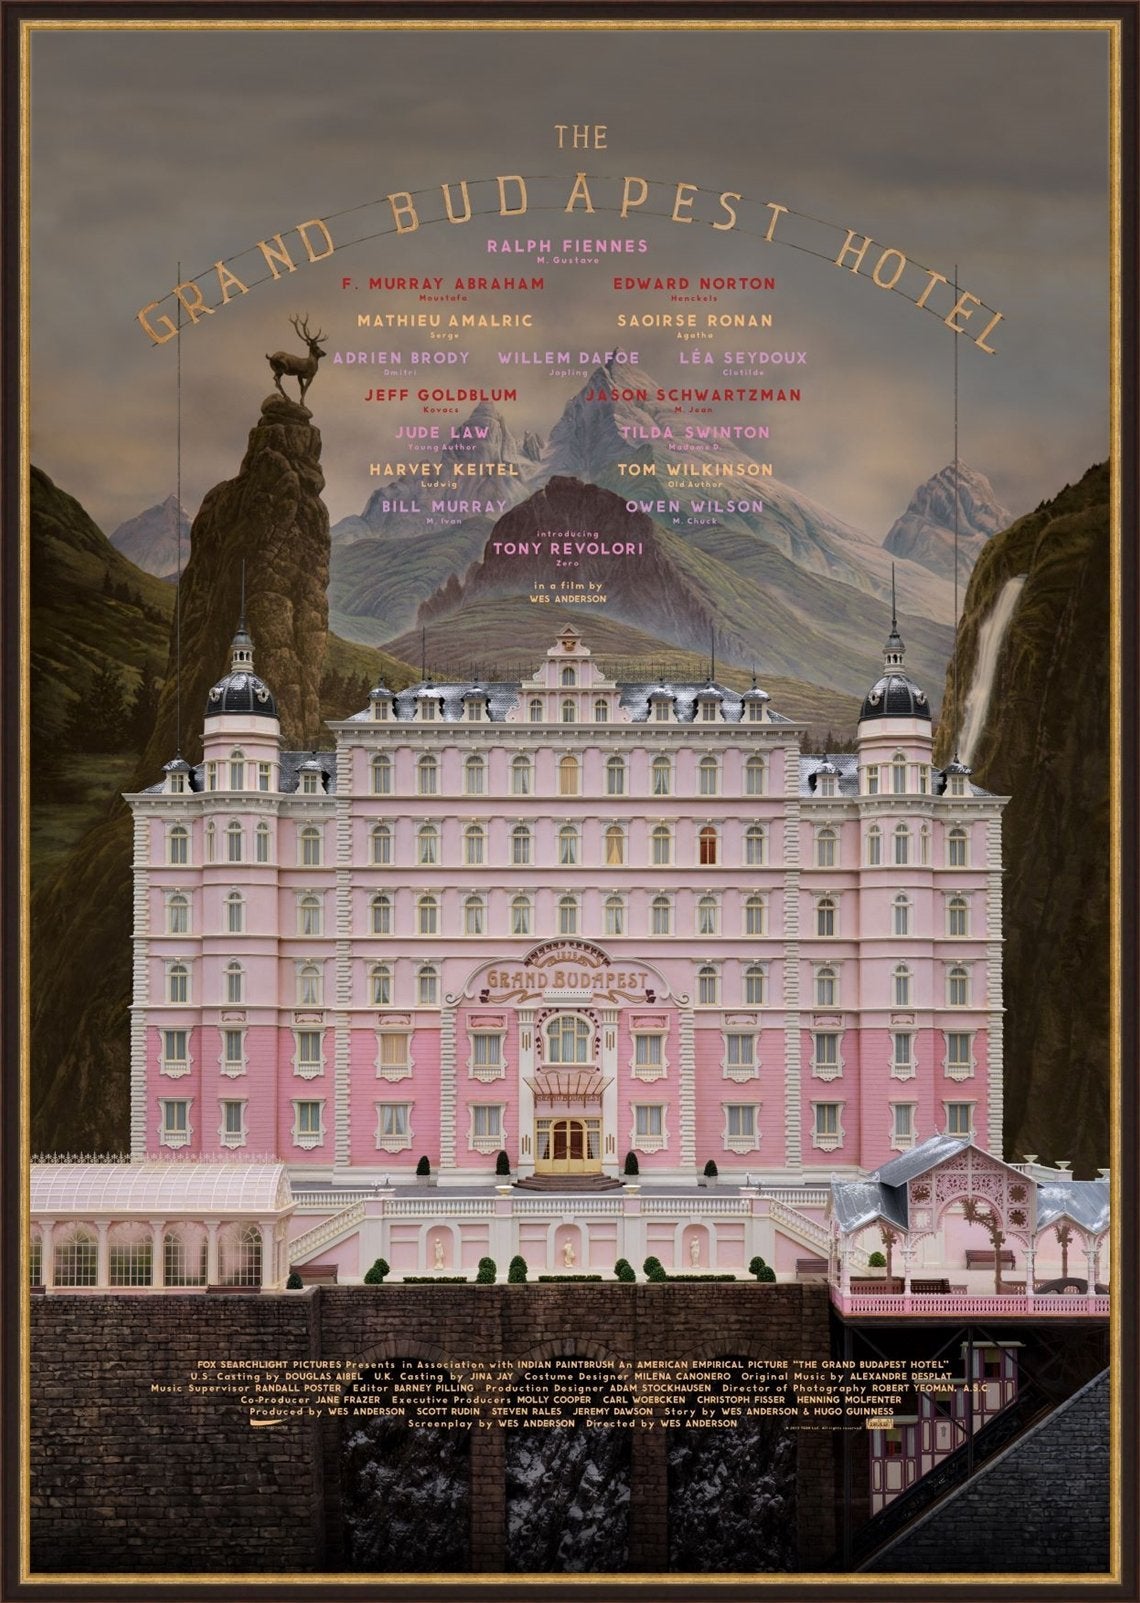 An original movie poster for the Wes Anderson film 